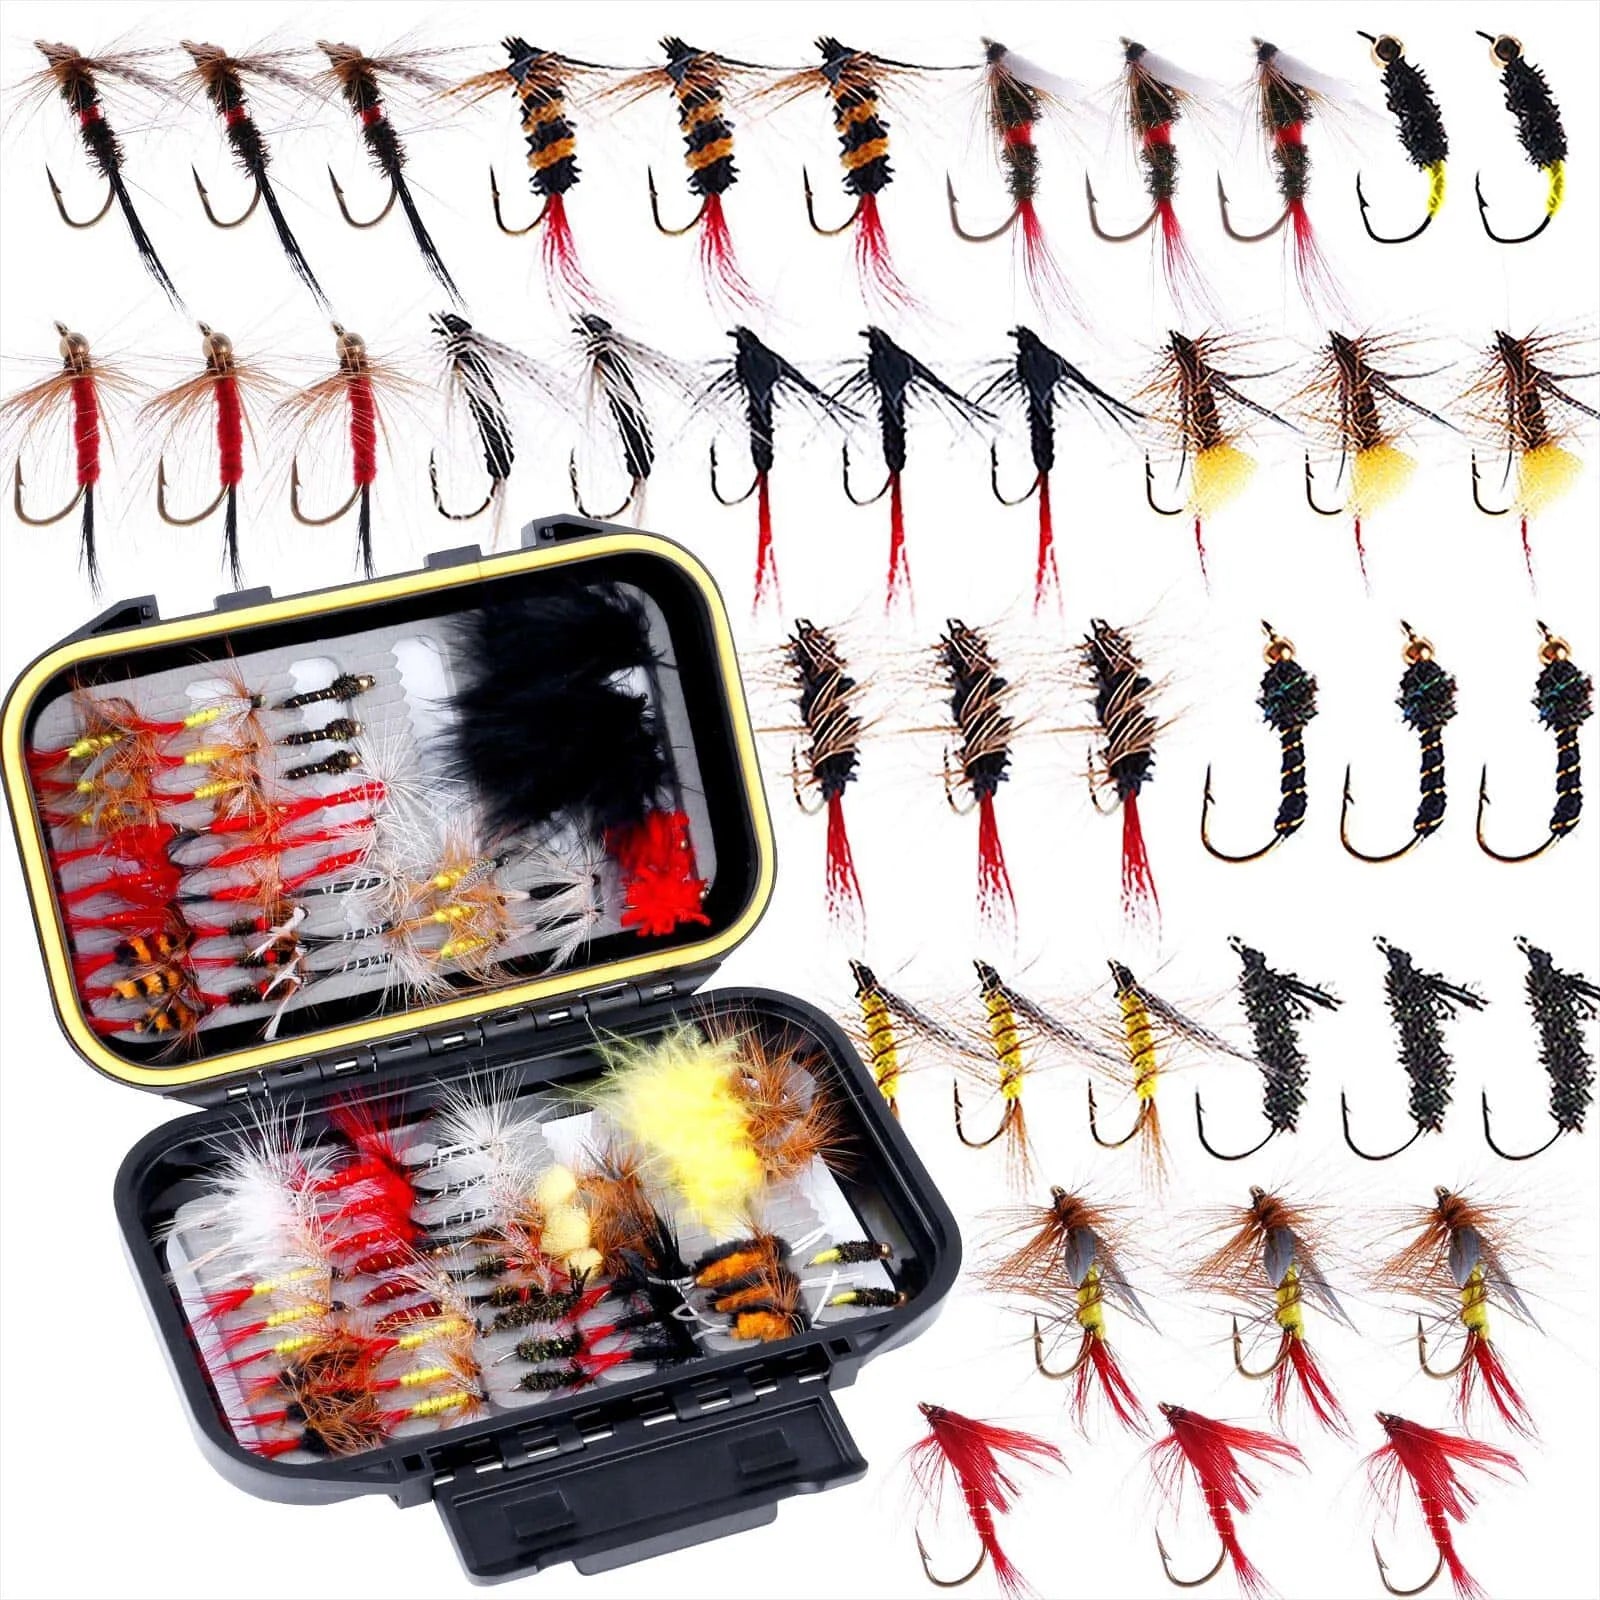 PLUSINNO Fishing Lures for 12 Rigs, Fishing Tackle Box with Tackle Included  Crankbaits, Spoon, Hooks, Weights and More Fishing Accessories, 353 Pcs  Fishing Lure Baits Gear Kit for Freshwater Bass… : 